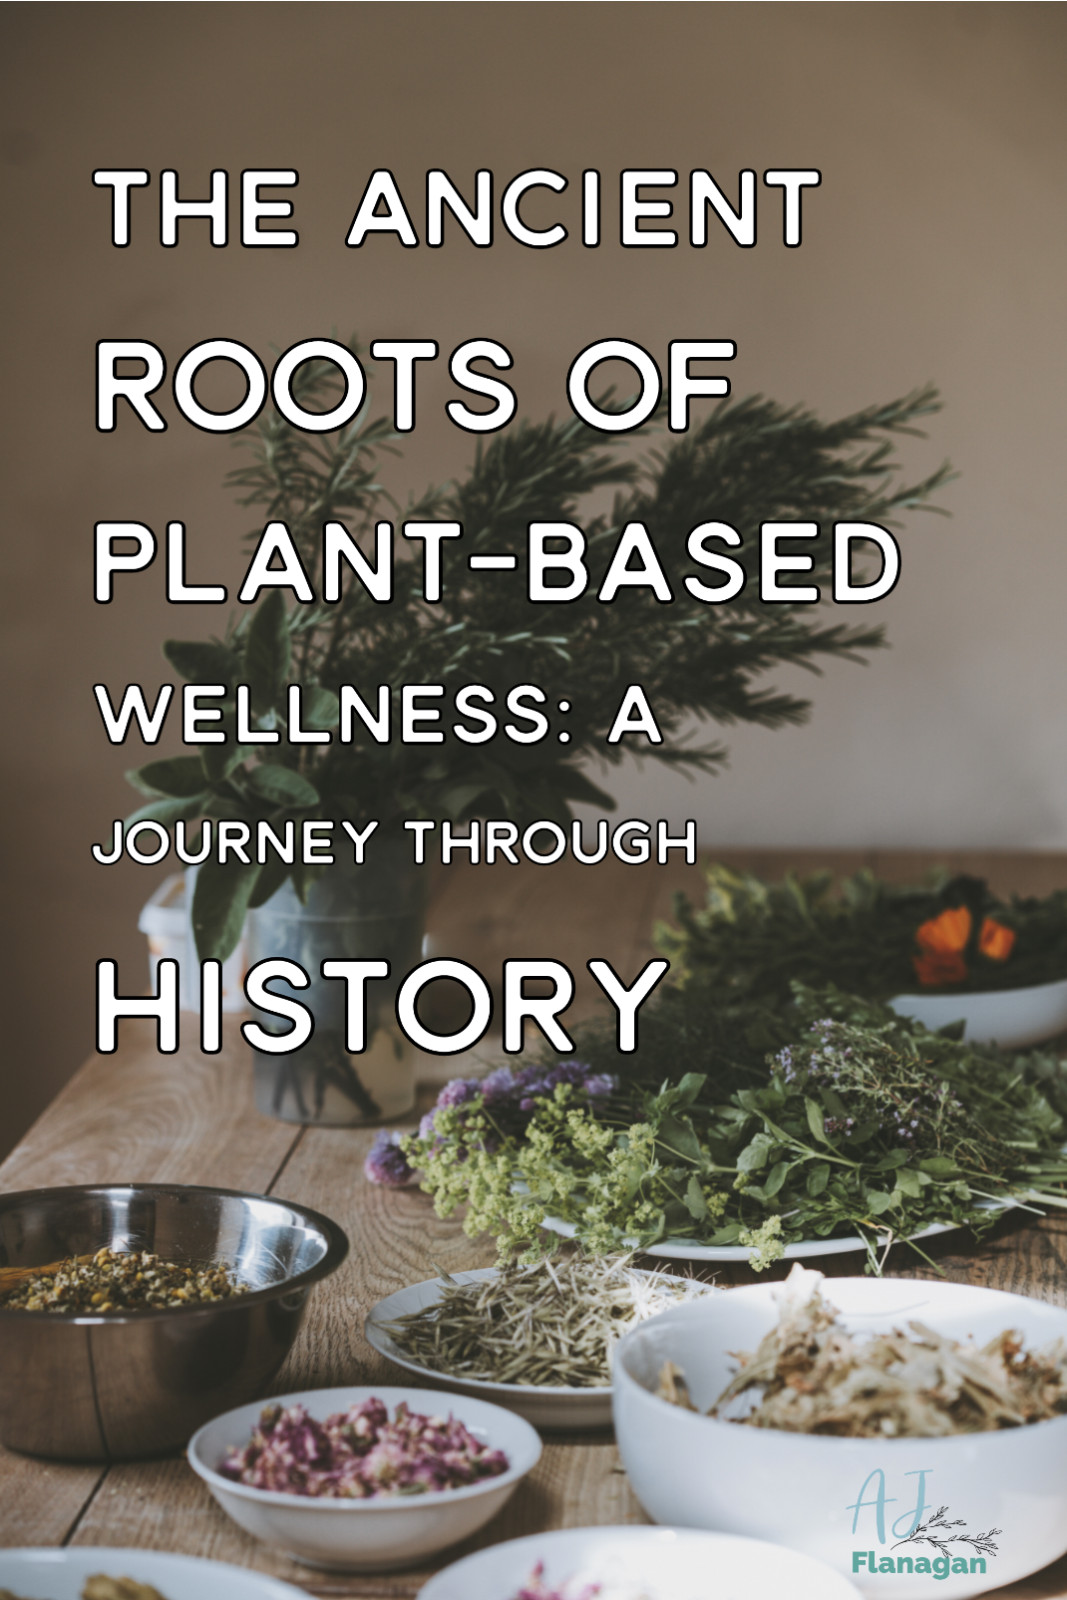 The Ancient Roots of Plant-based Wellness: A Journey Through History